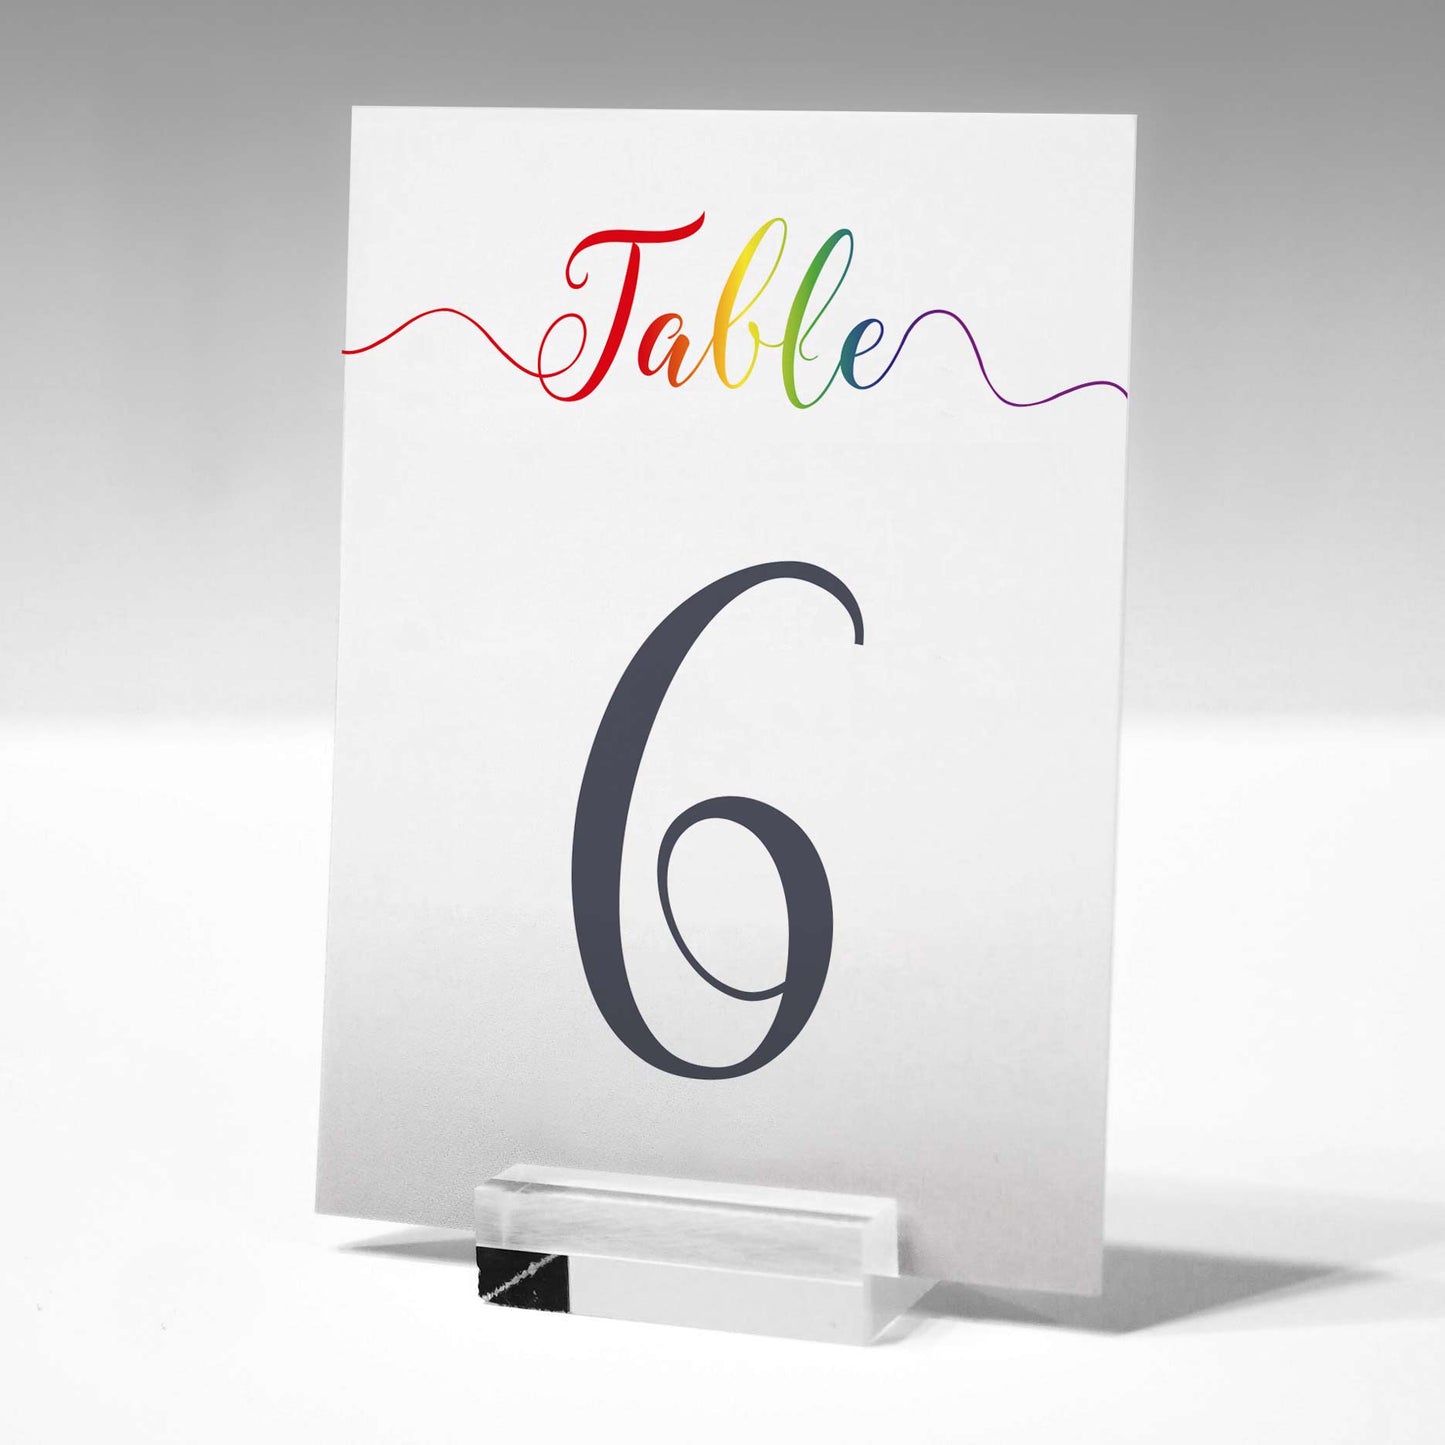 printed rainbow table number in a glass stand